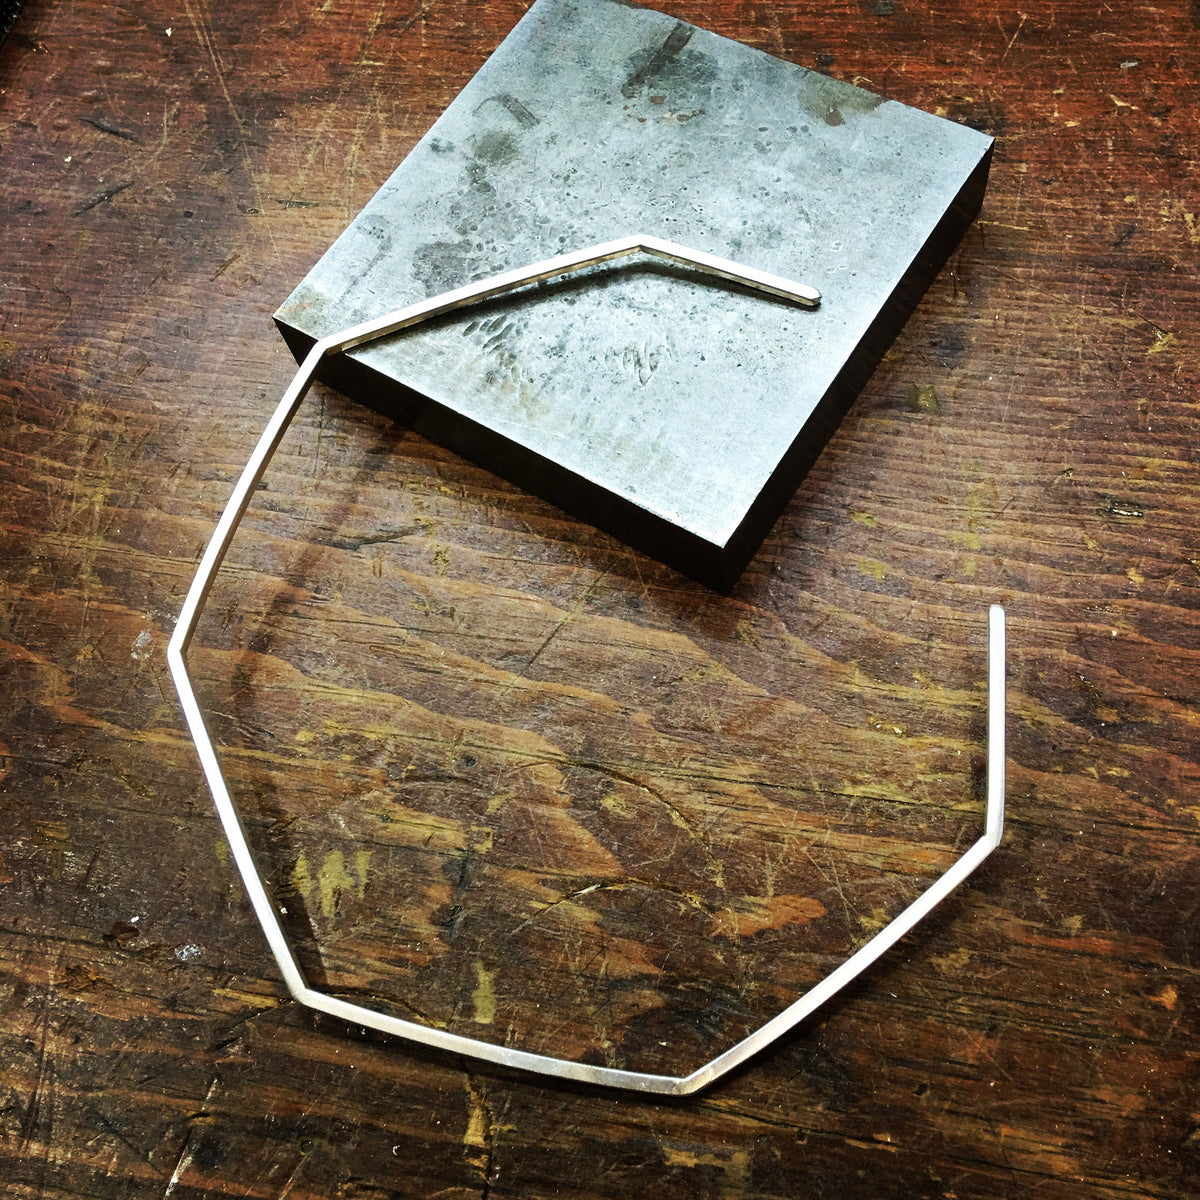 Geometric Collar Necklace in Sterling Silver